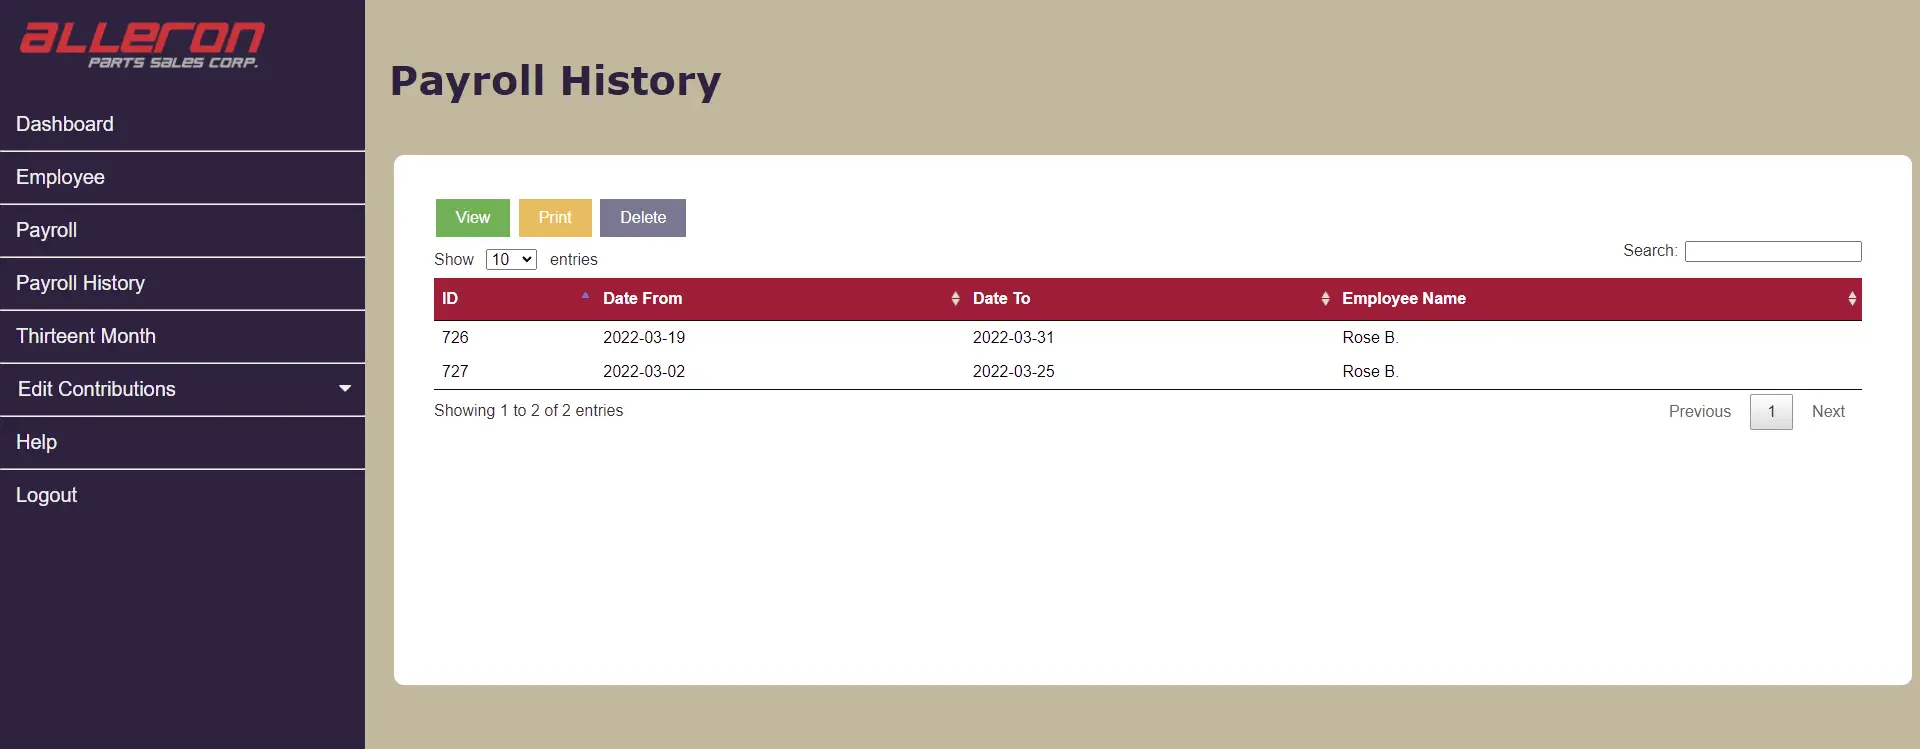 Payroll System in PHP - Payroll History